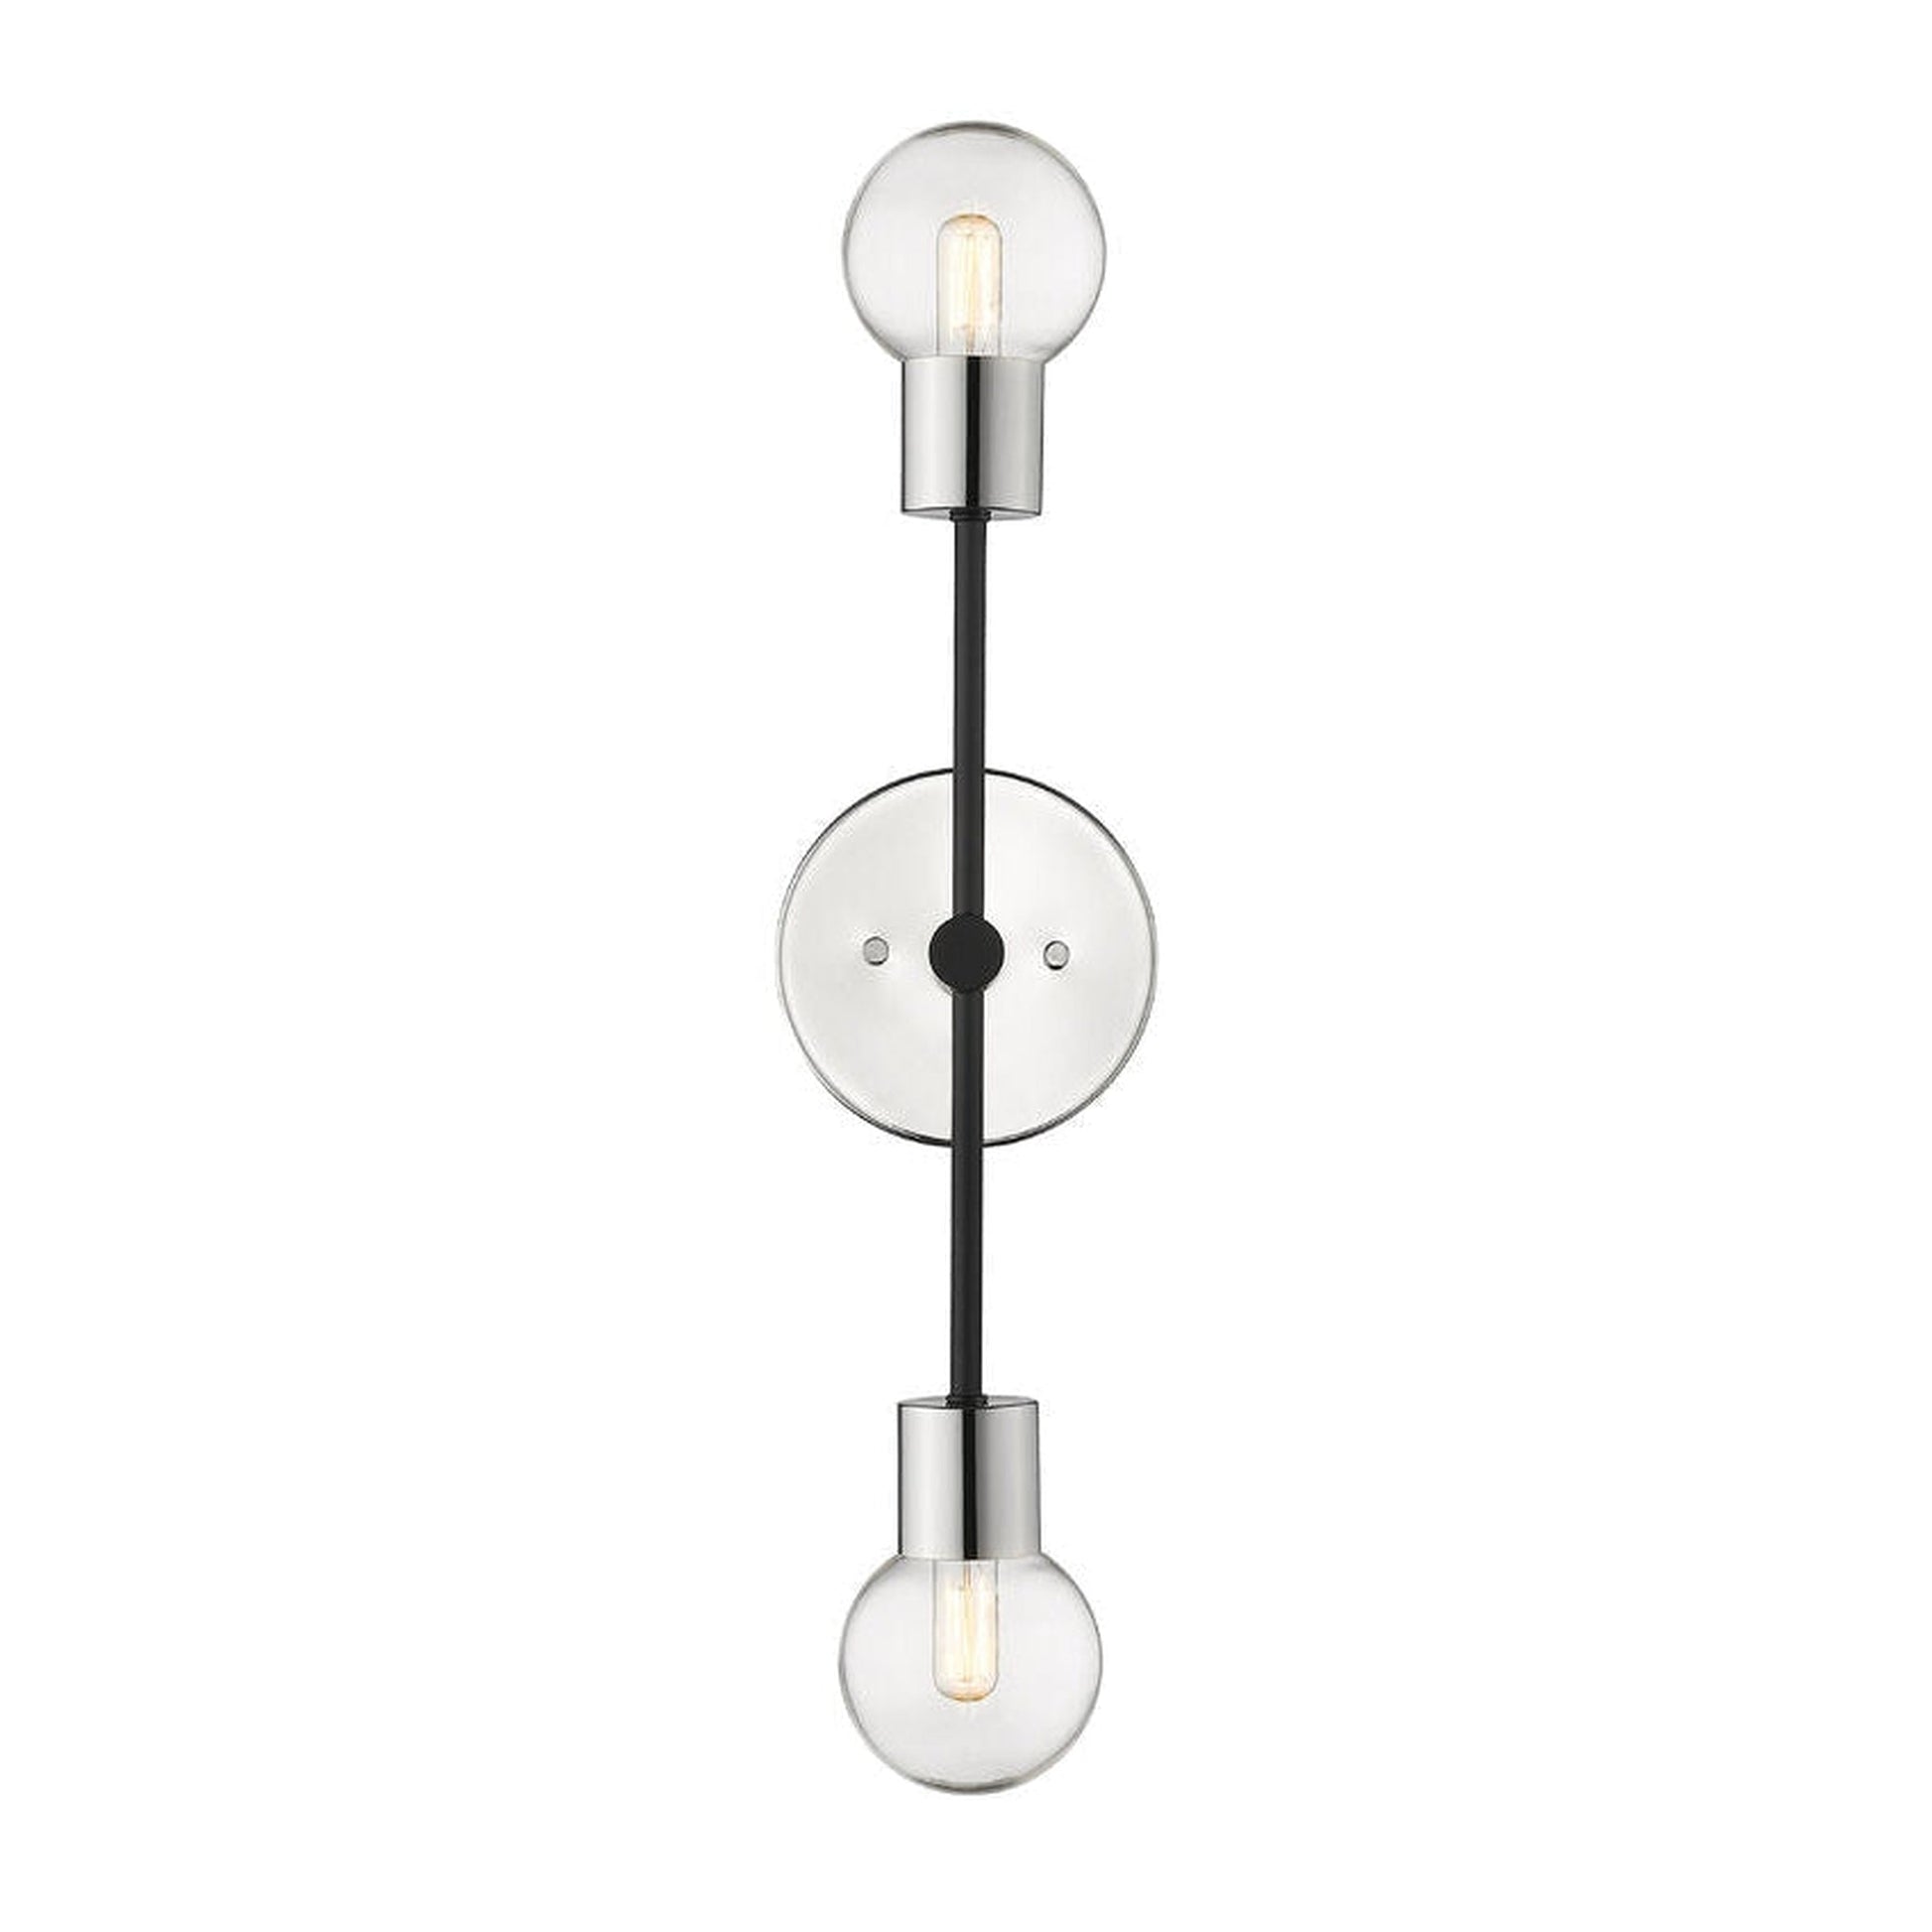 Z-Lite Neutra 6" 2-Light Matte Black and Polished Nickel Wall Sconce With Clear Glass Shade